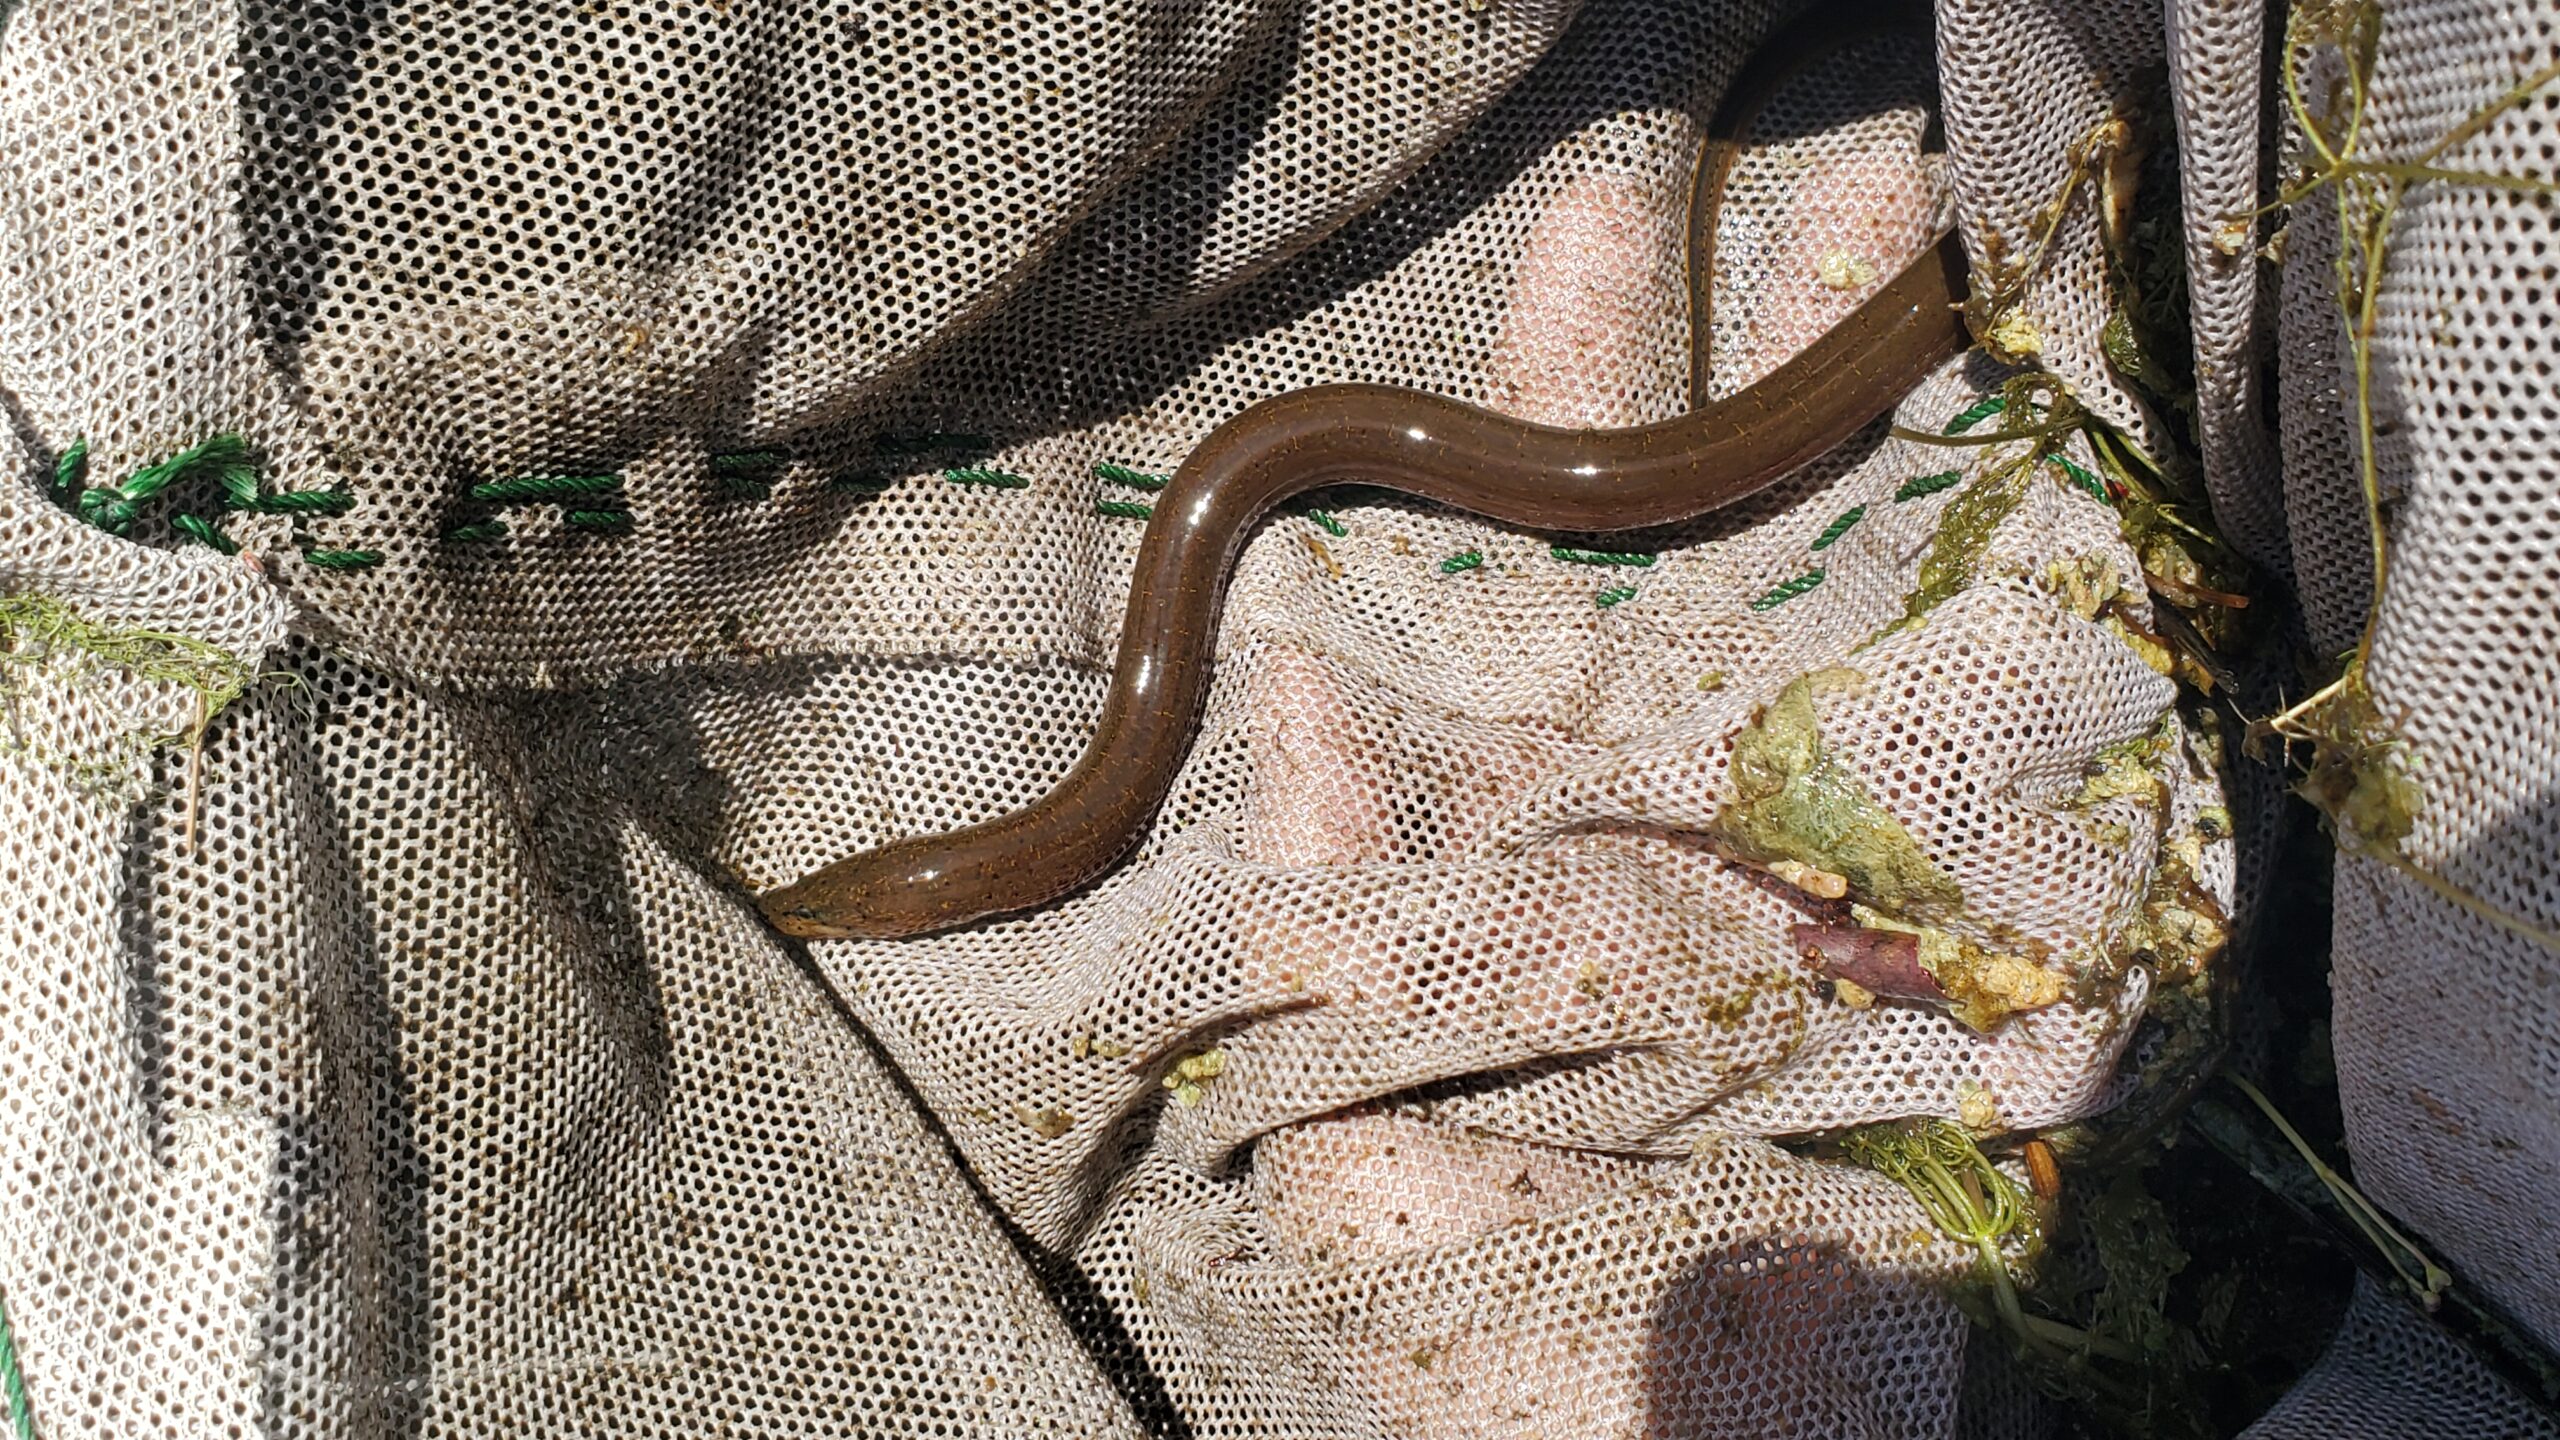 A beige net surrounds a brown swamp eel, making an s shape on the net material.